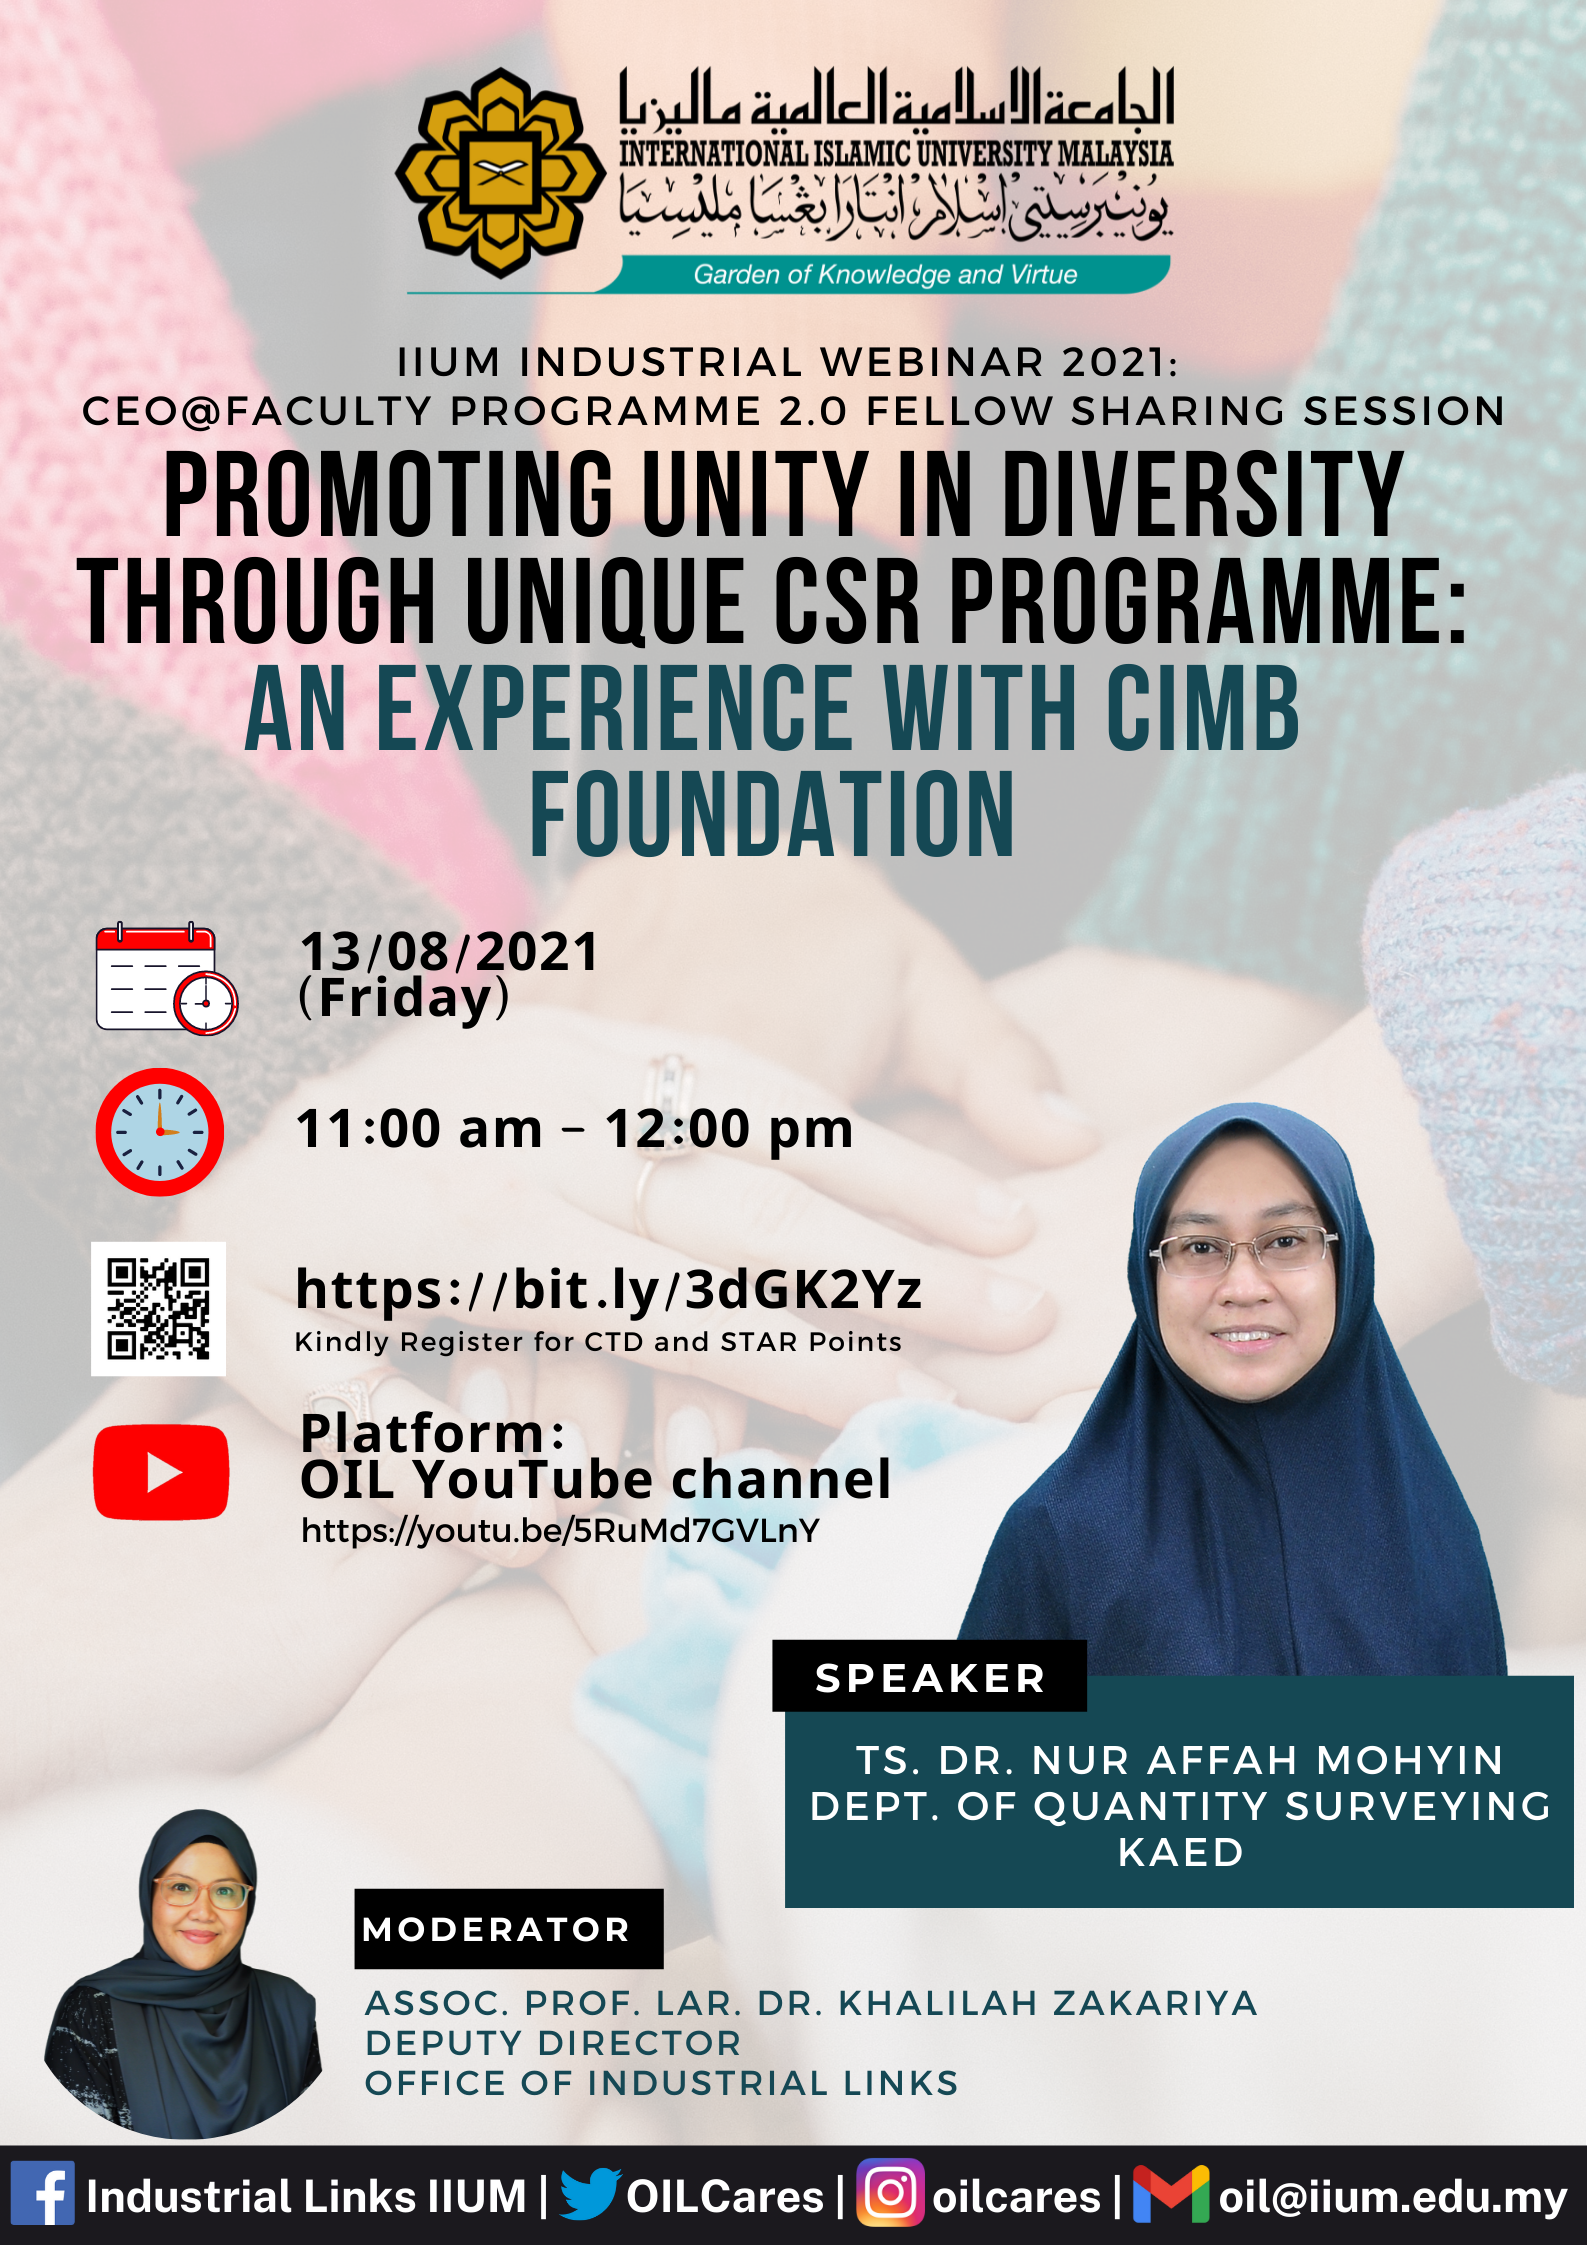 IIUM Industrial Webinar series 2021: Promoting Unity in Diversity through unique CSR Programme: An Experience with CIMB Foundation